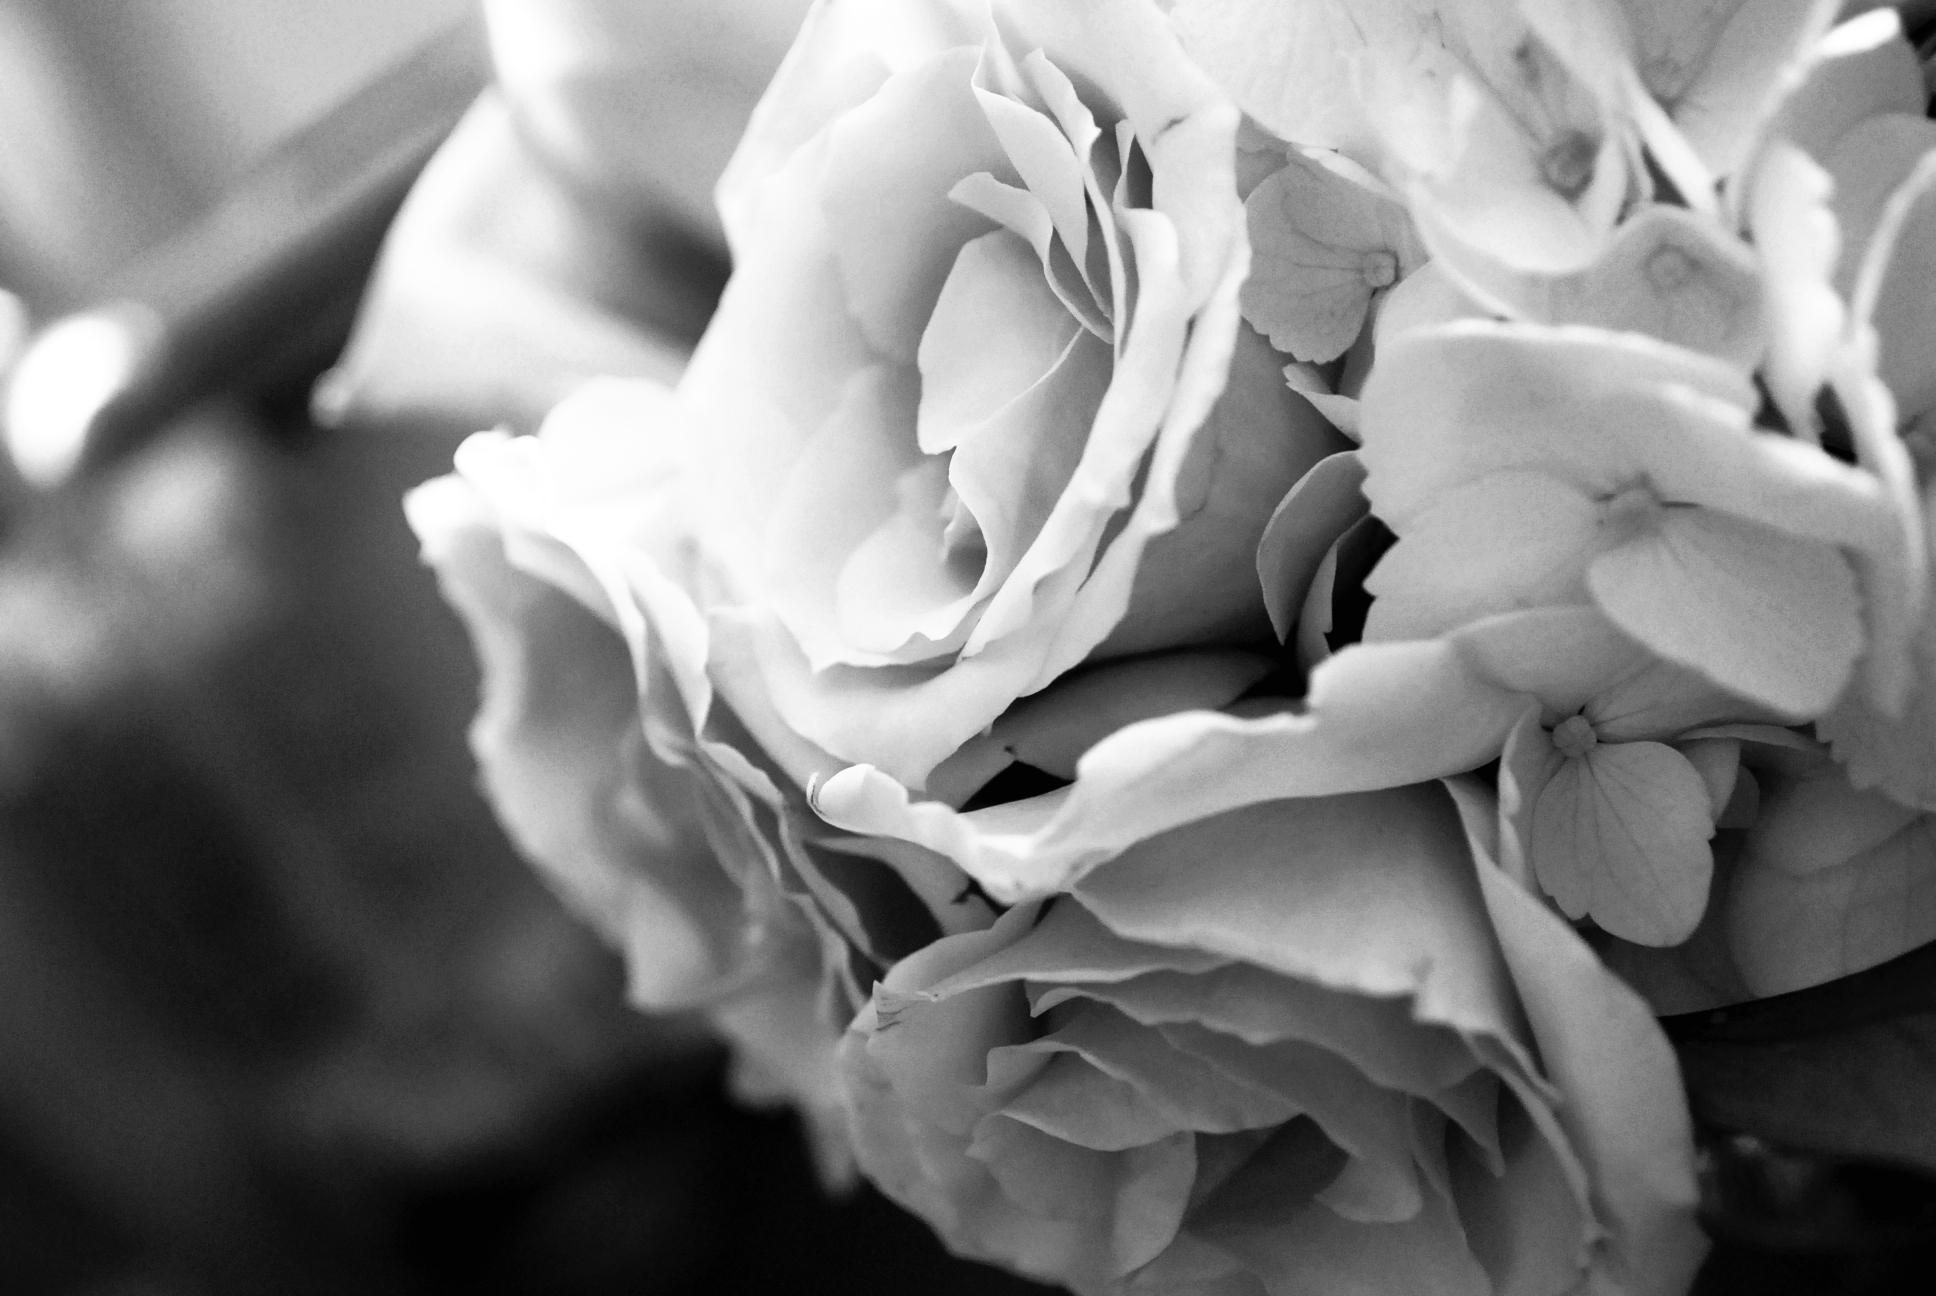 Black And White Flowers Wallpaper Hd - Black And White Rose Flower , HD Wallpaper & Backgrounds